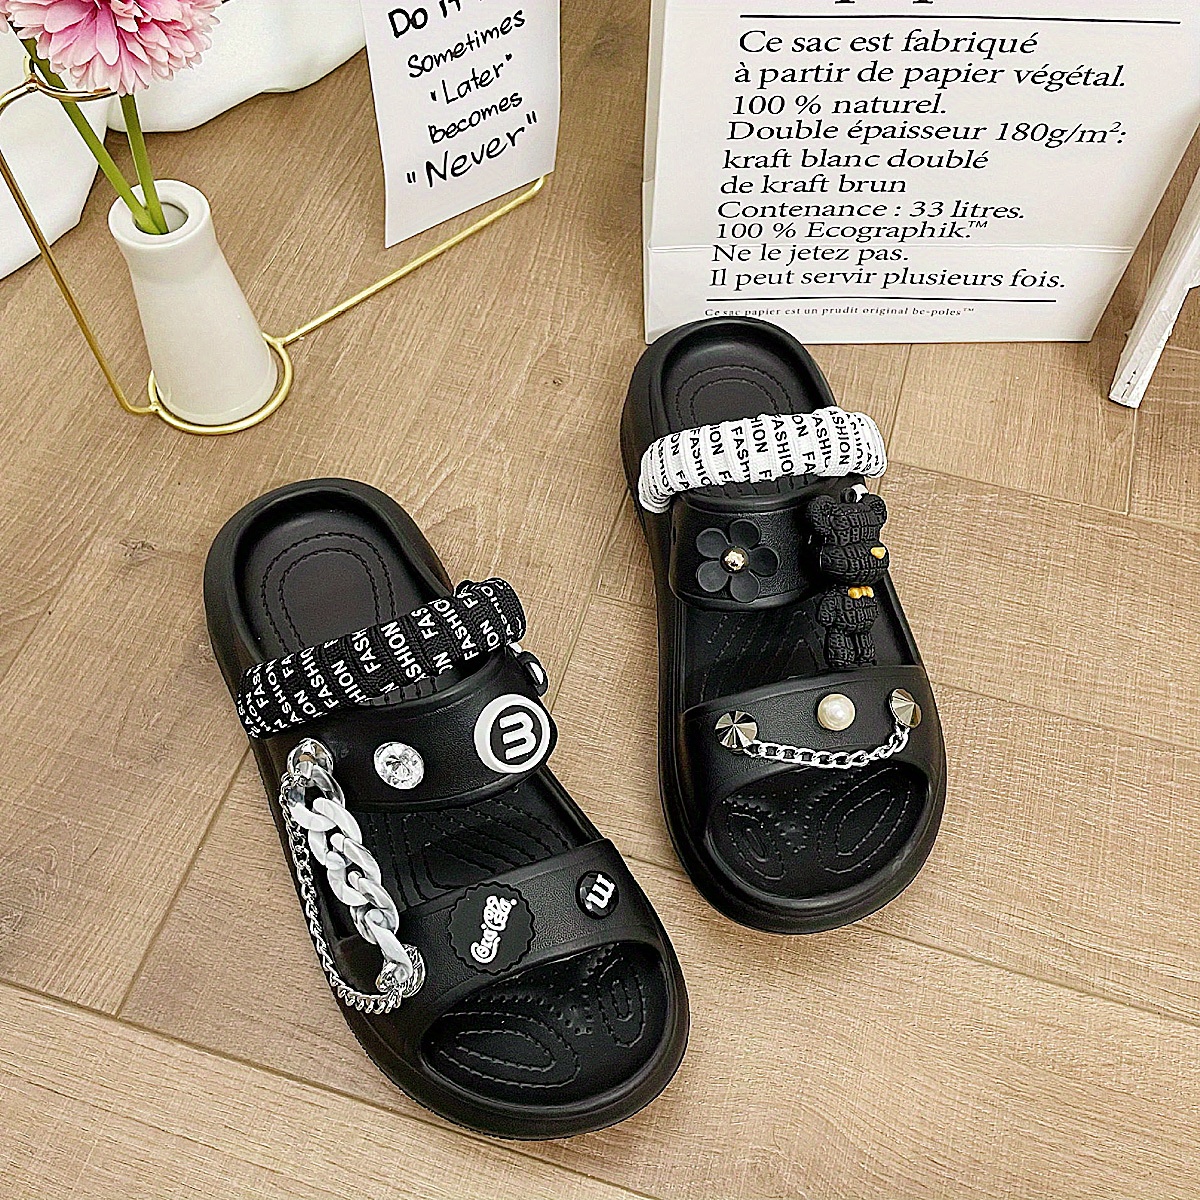 Chanel Double Shoe Charms